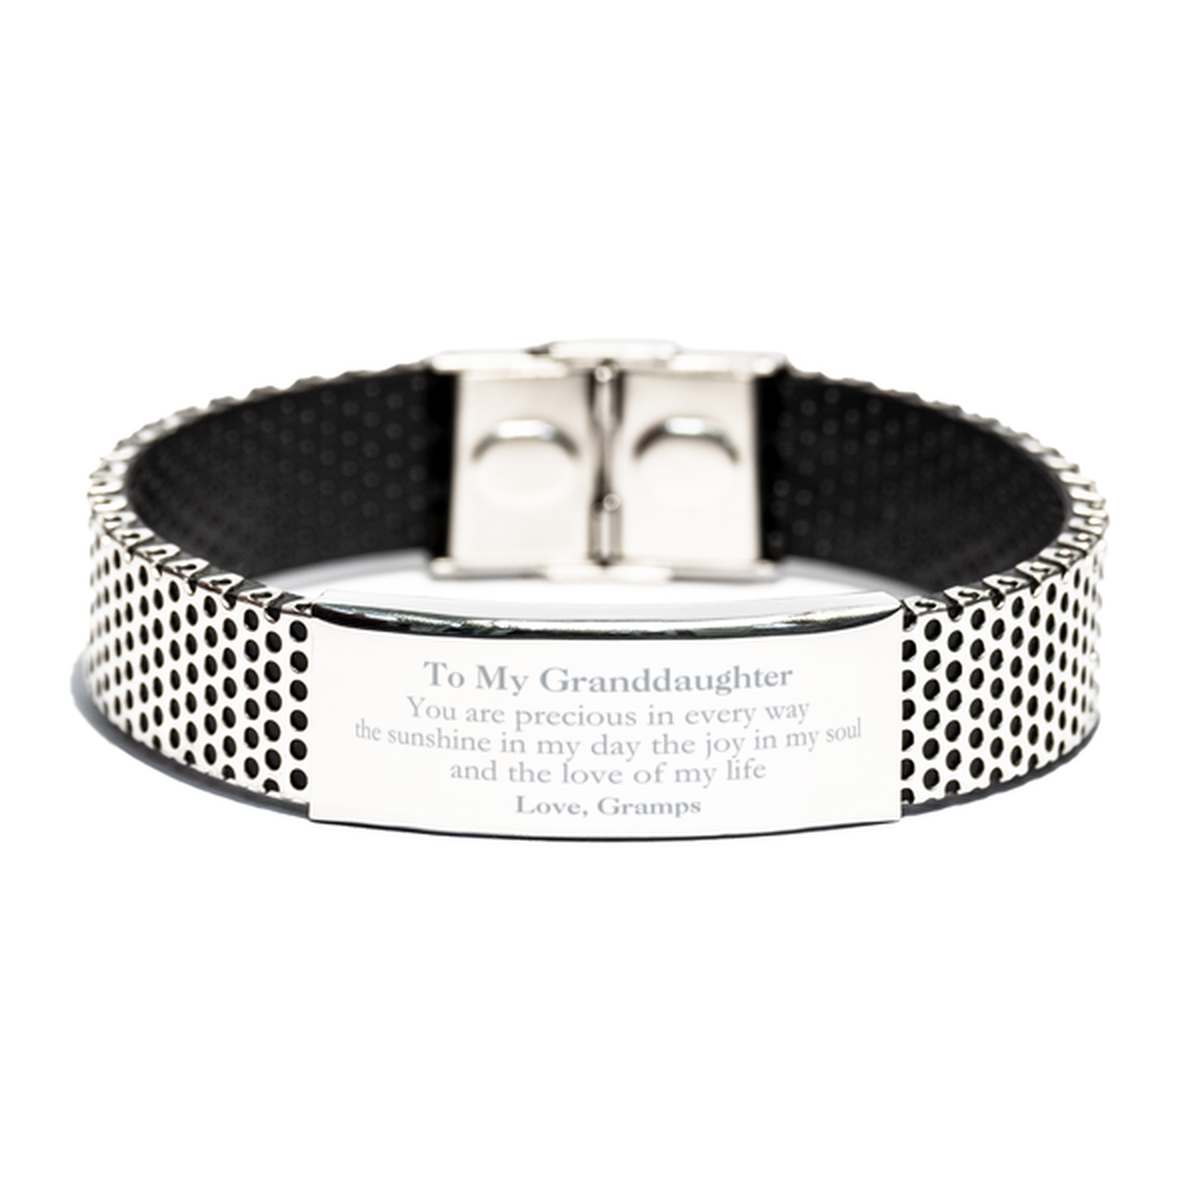 Graduation Gifts for Granddaughter Stainless Steel Bracelet Present from Gramps, Christmas Granddaughter Birthday Gifts Granddaughter You are precious in every way the sunshine in my day. Love, Gramps